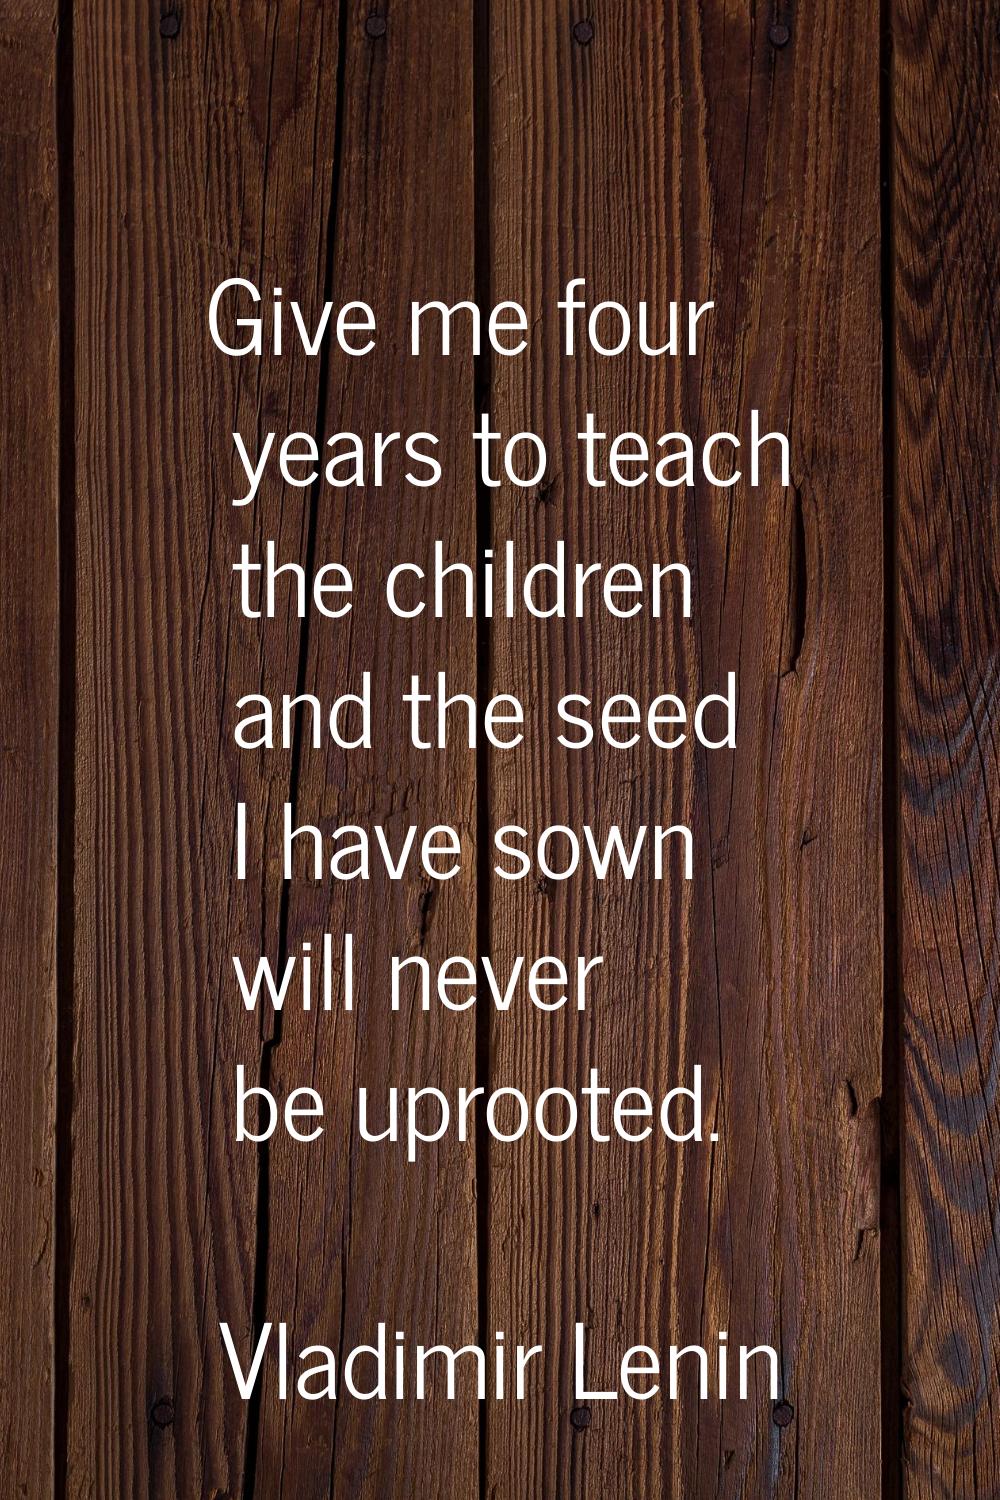 Give me four years to teach the children and the seed I have sown will never be uprooted.